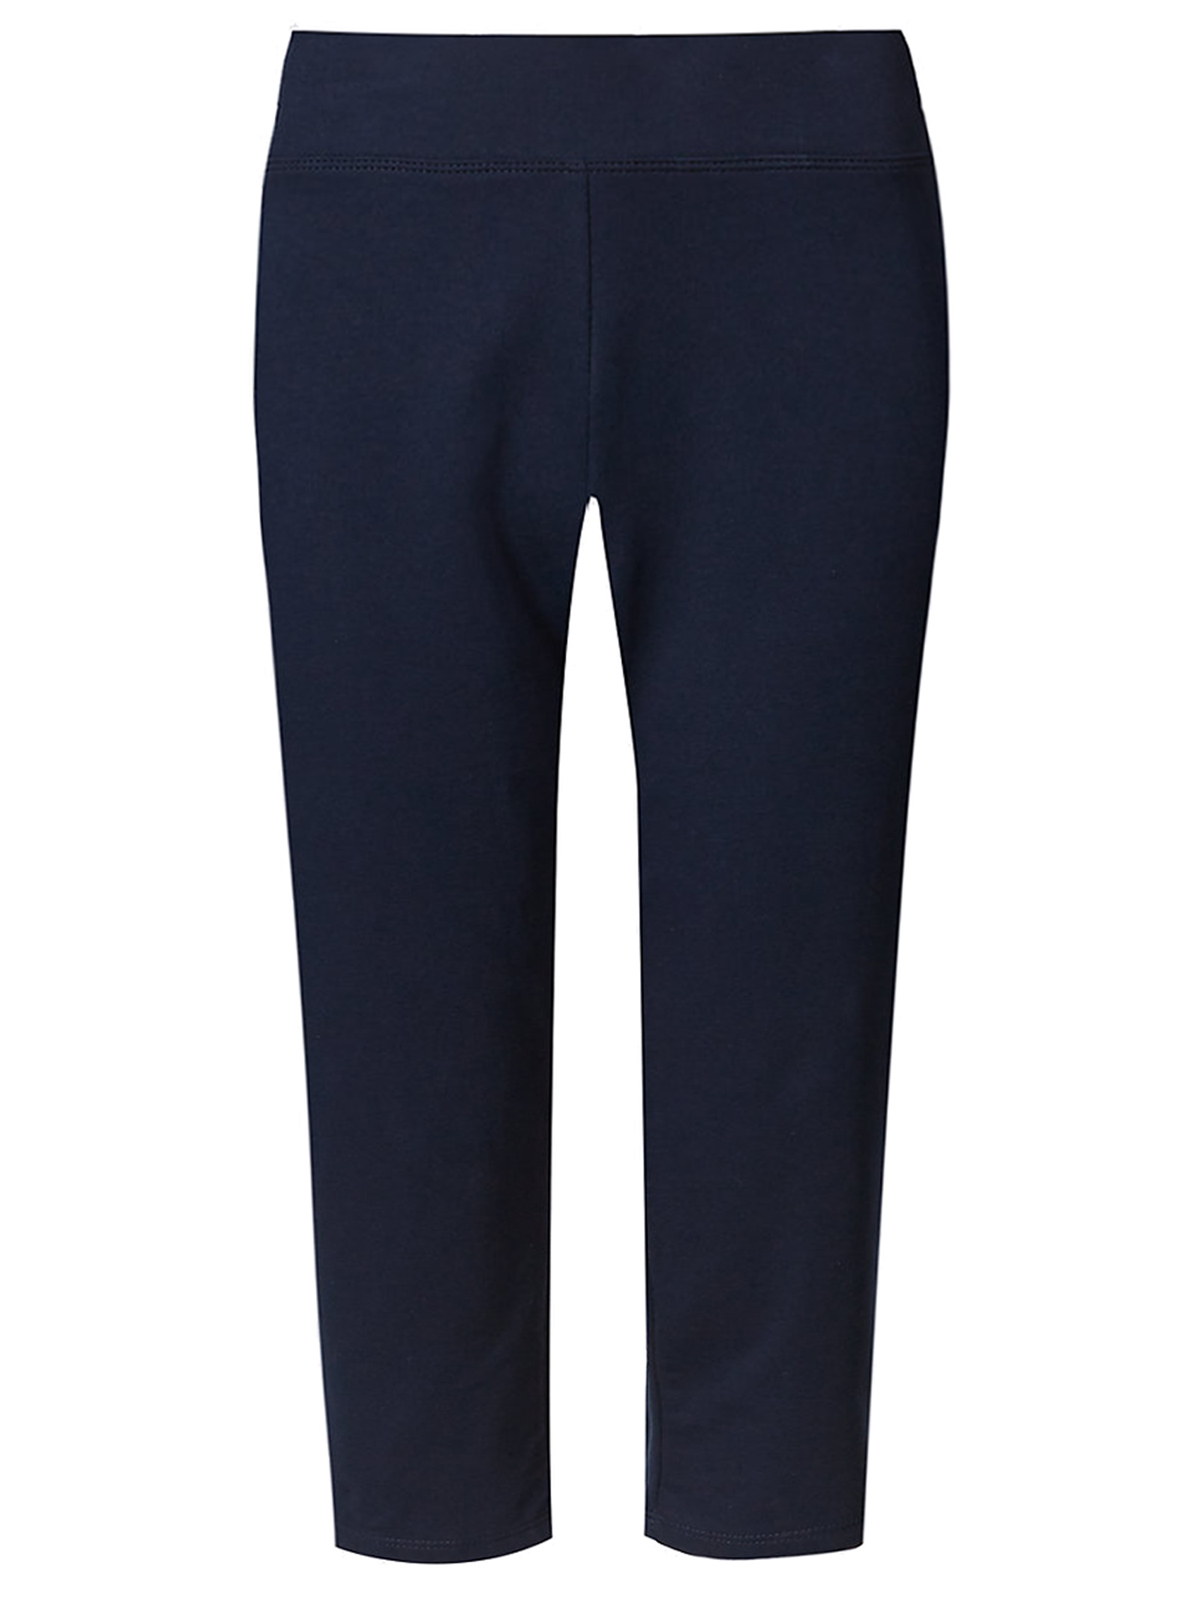 Marks and Spencer - - M&5 NAVY Cotton Rich Cropped Leggings - Size 10 to 14